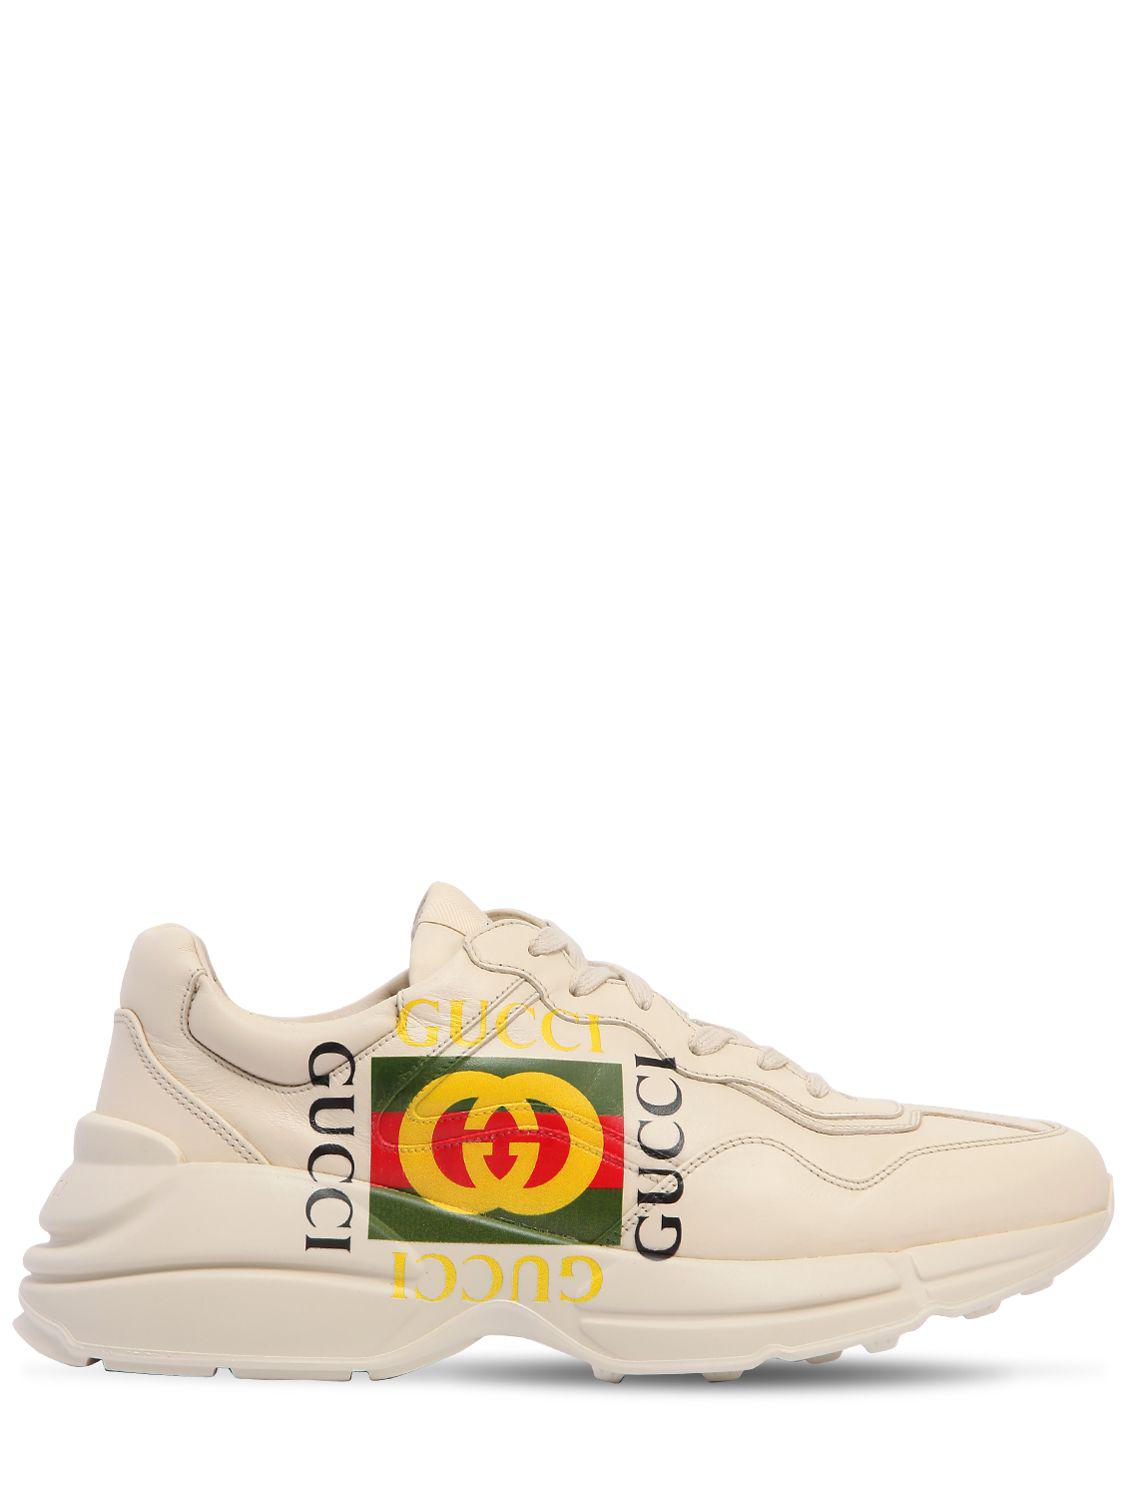 Gucci Rhyton Vintage Logo Leather Sneakers in White for Men - Lyst